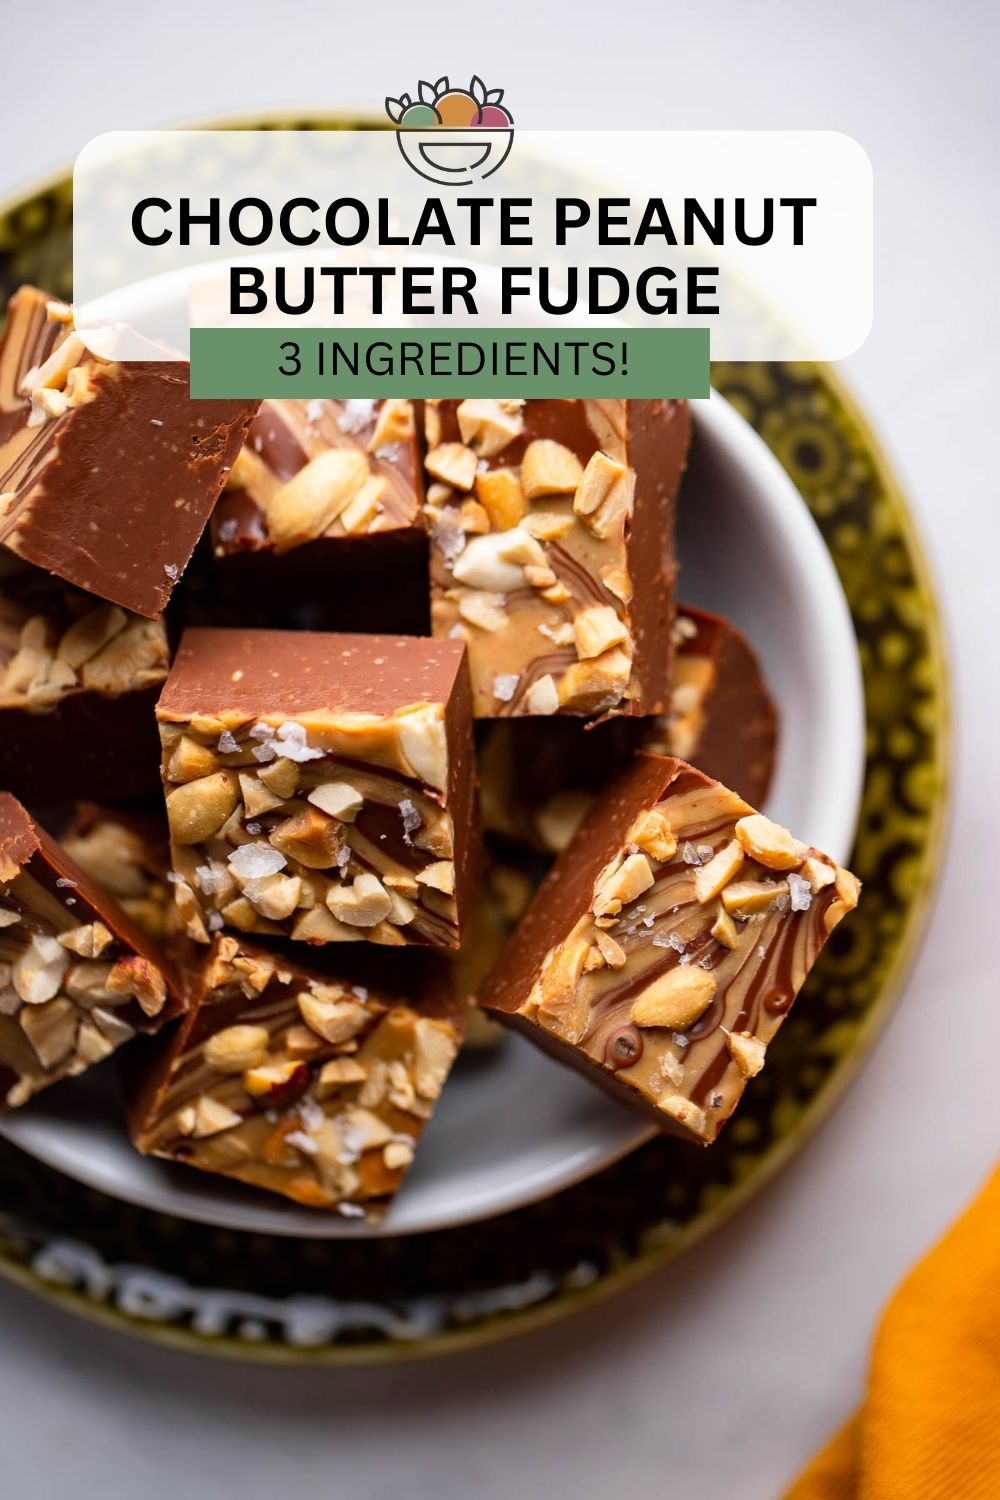 fudge in pan garnished with chopped peanuts before chilling.